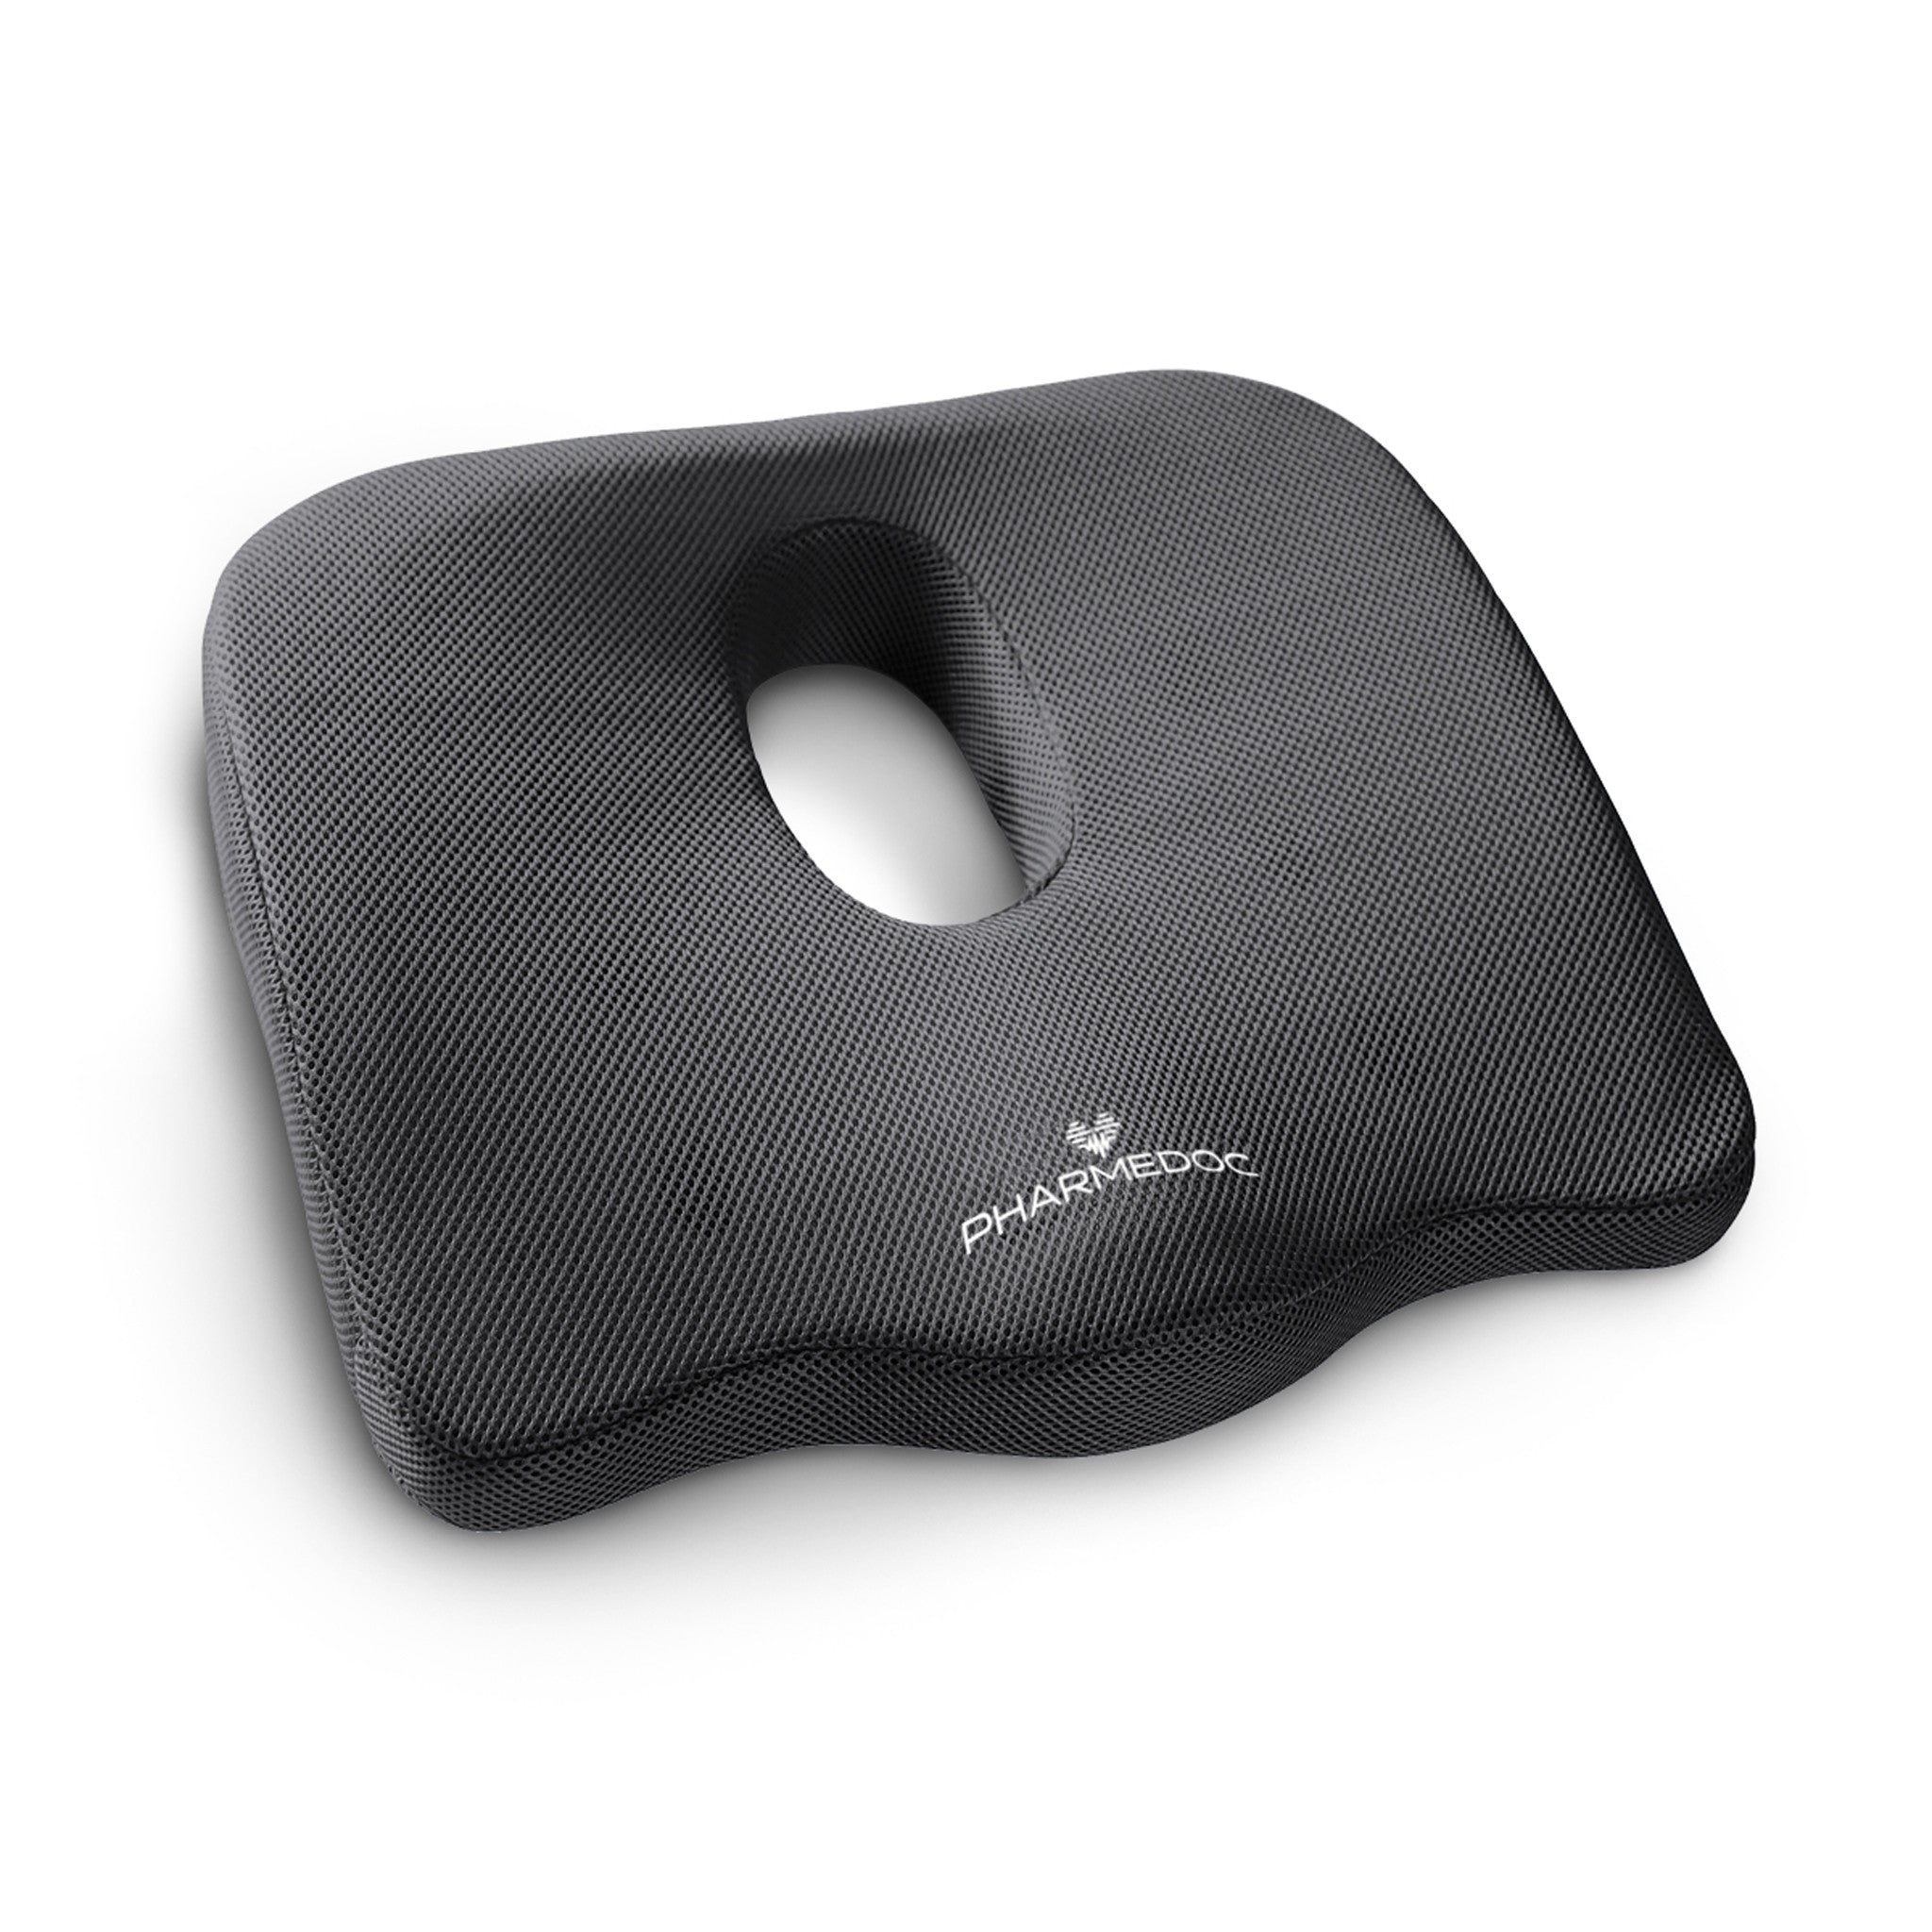 Pressure Relief Seat Cushion Back Pain Orthopedic Therapy Car